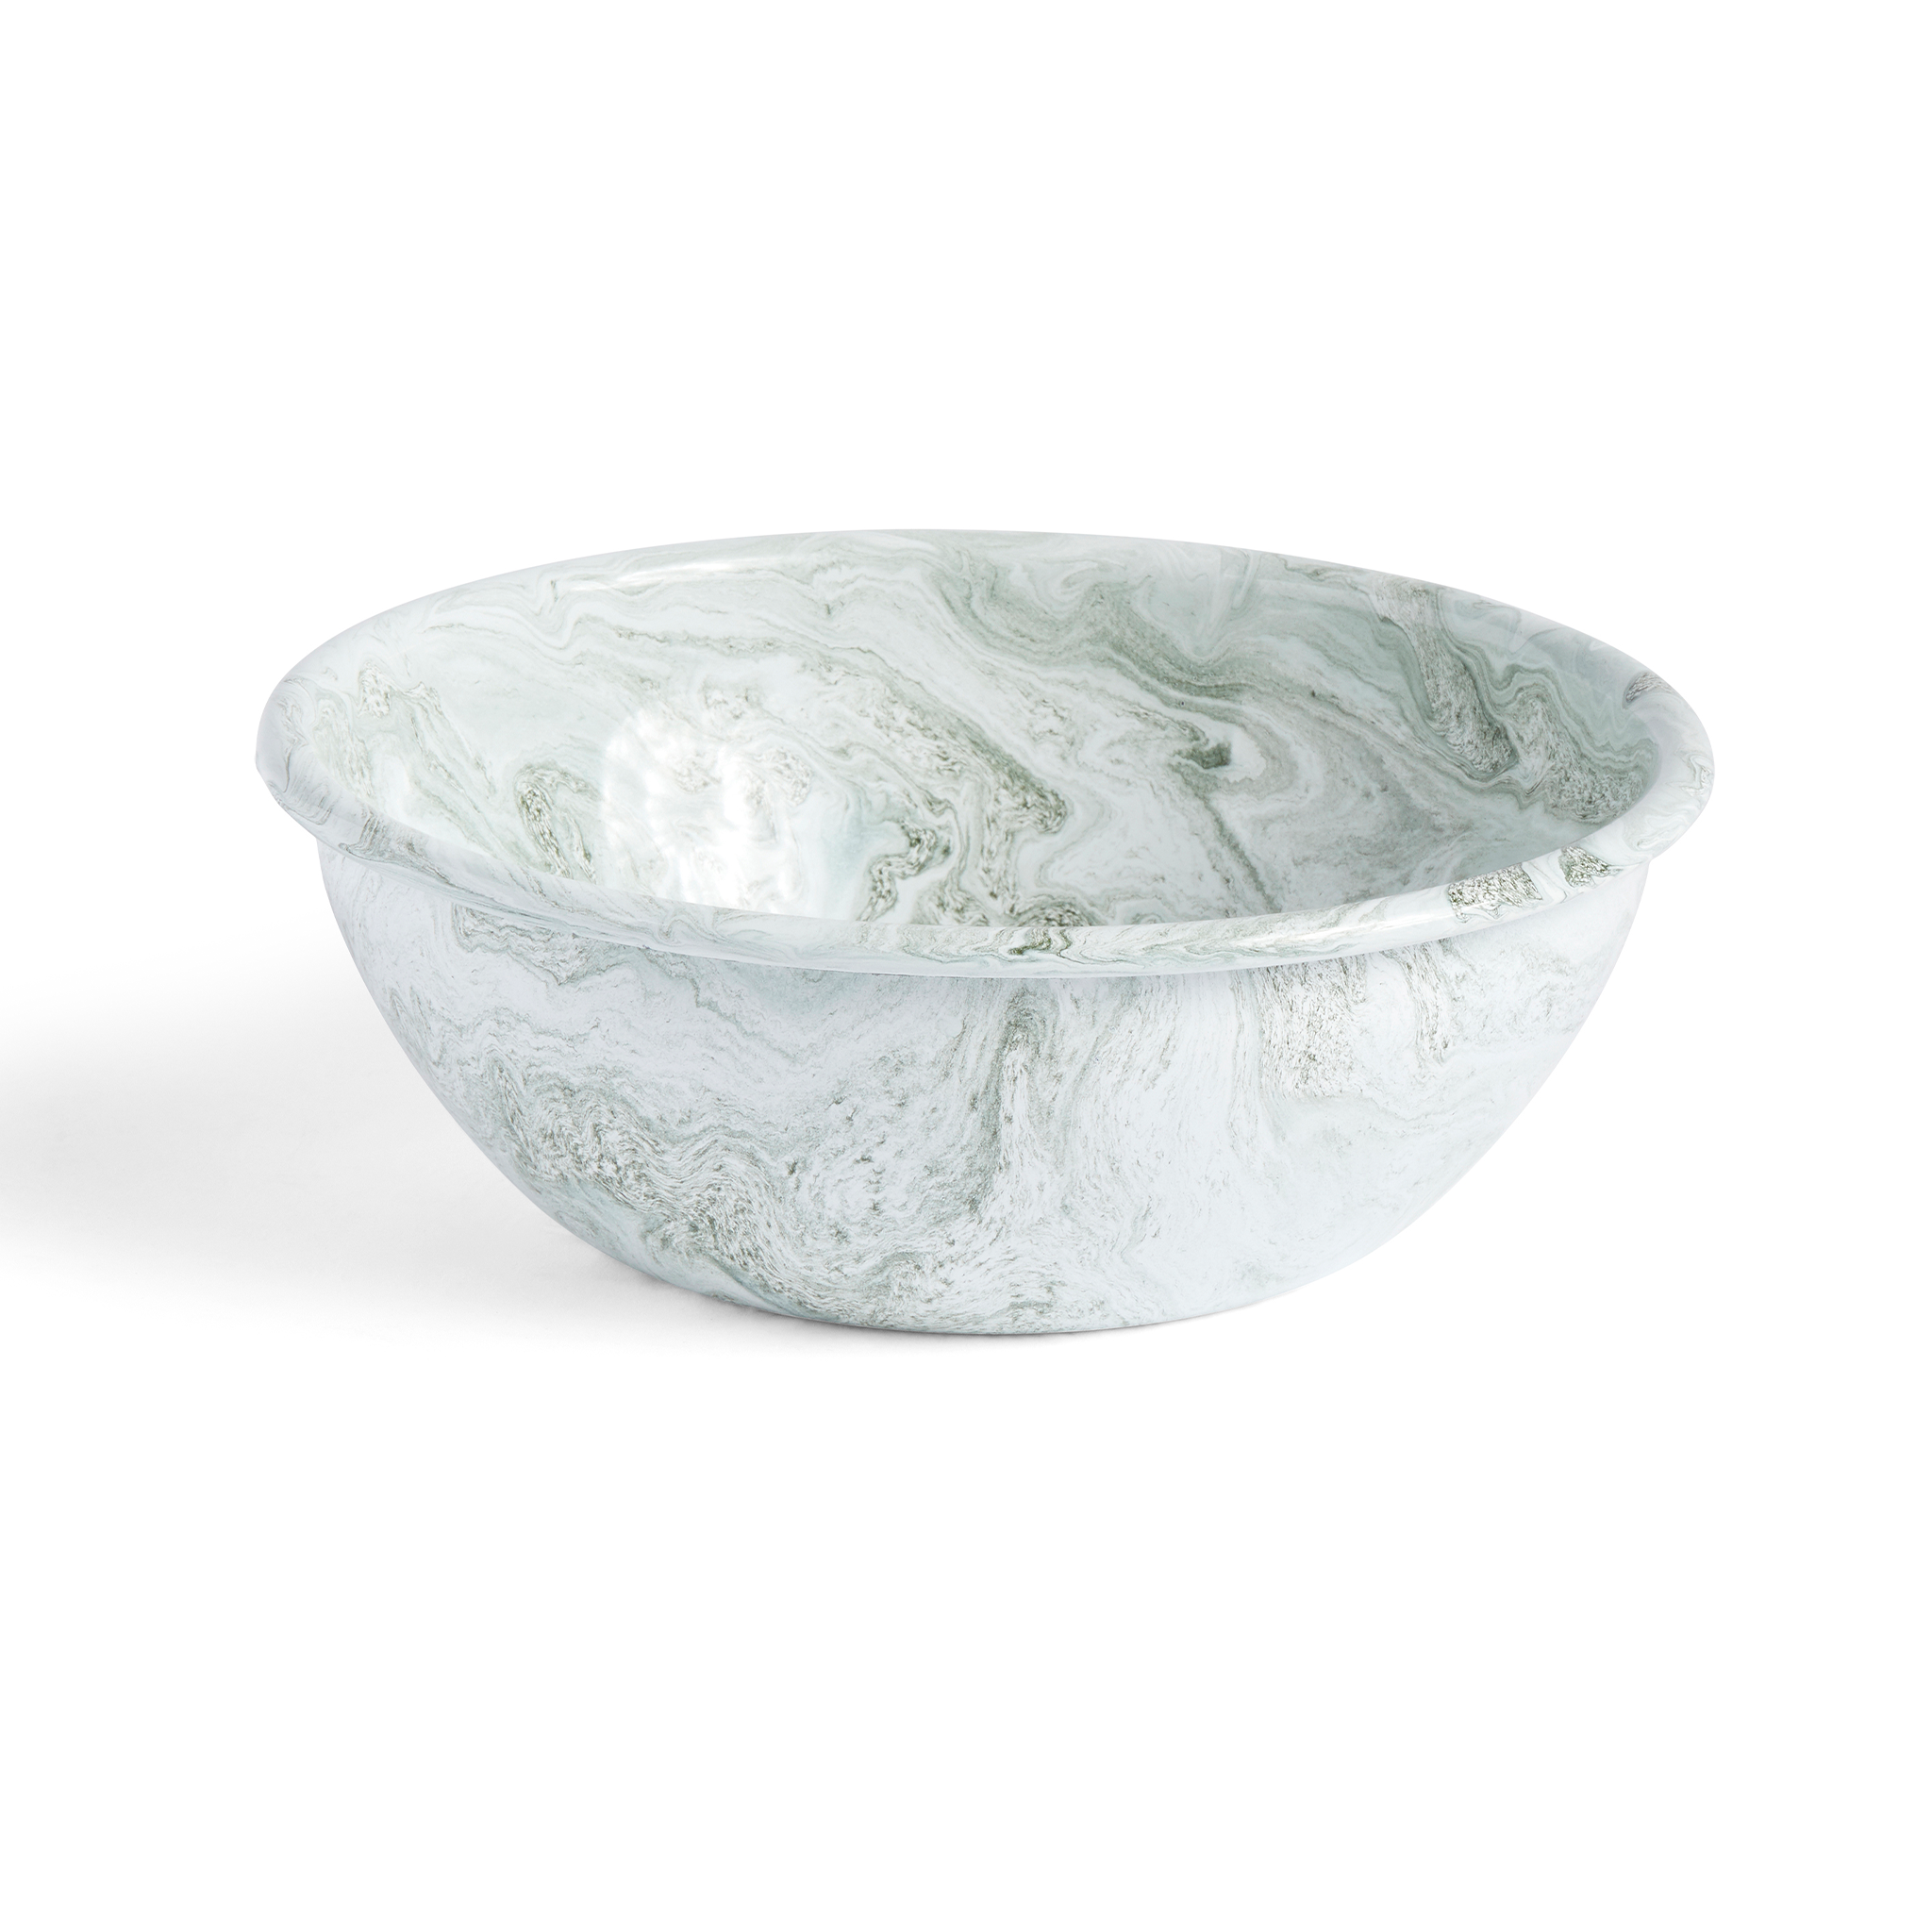 Soft Ice Salad Bowl by Hay